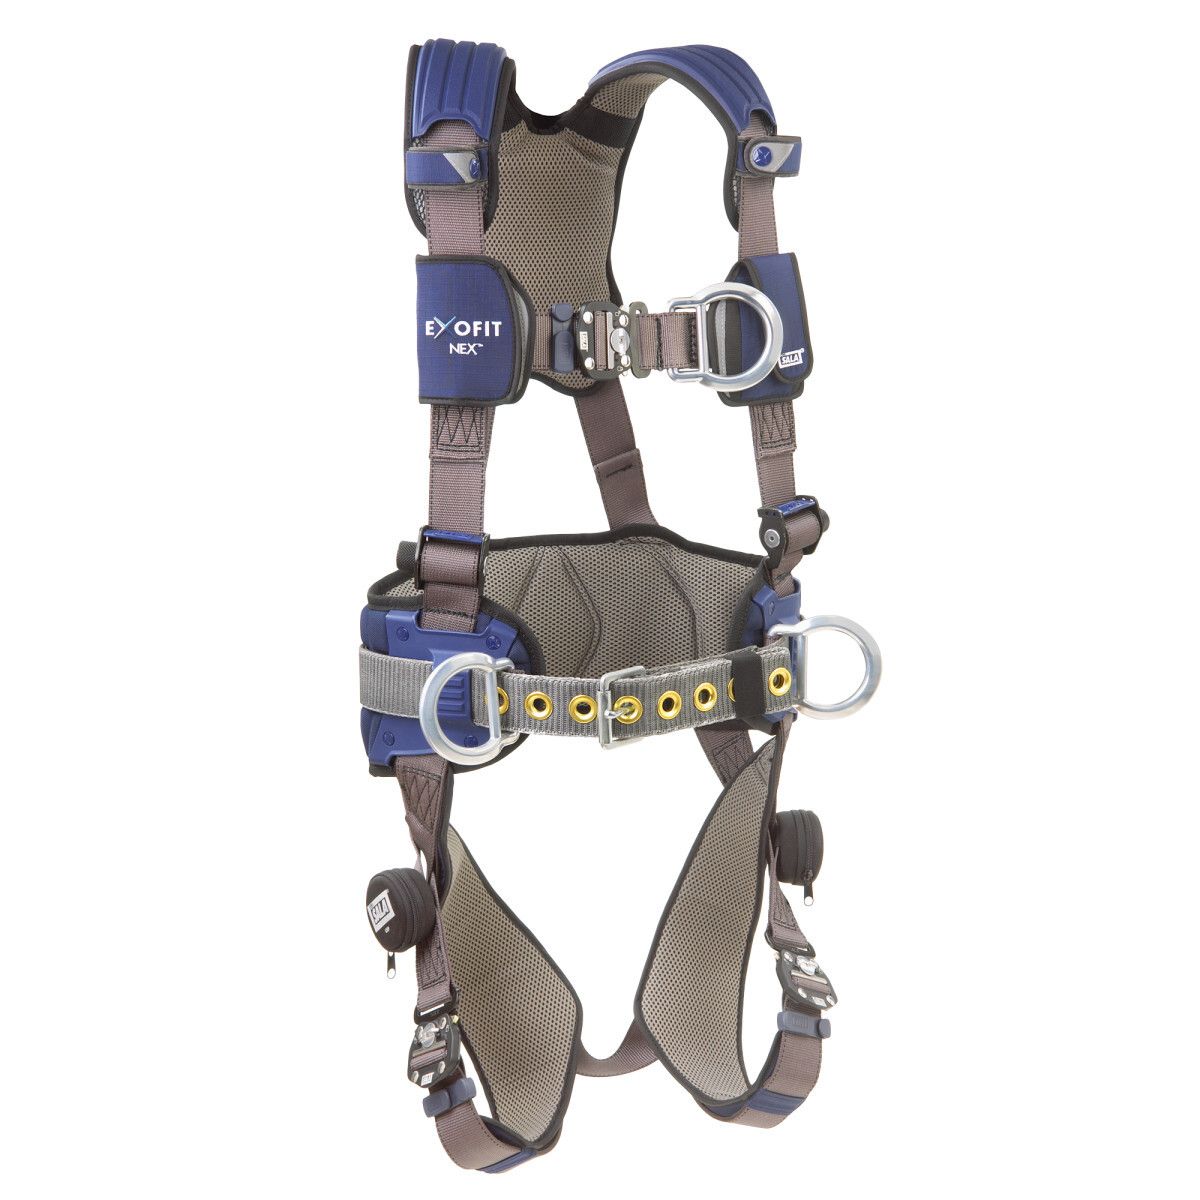 3M™ DBI-SALA® Large ExoFit NEX™ Construction/Full Body Style Harness With Tech-Lite™ Aluminum Back, Front And Side D-Ring, Duo-L